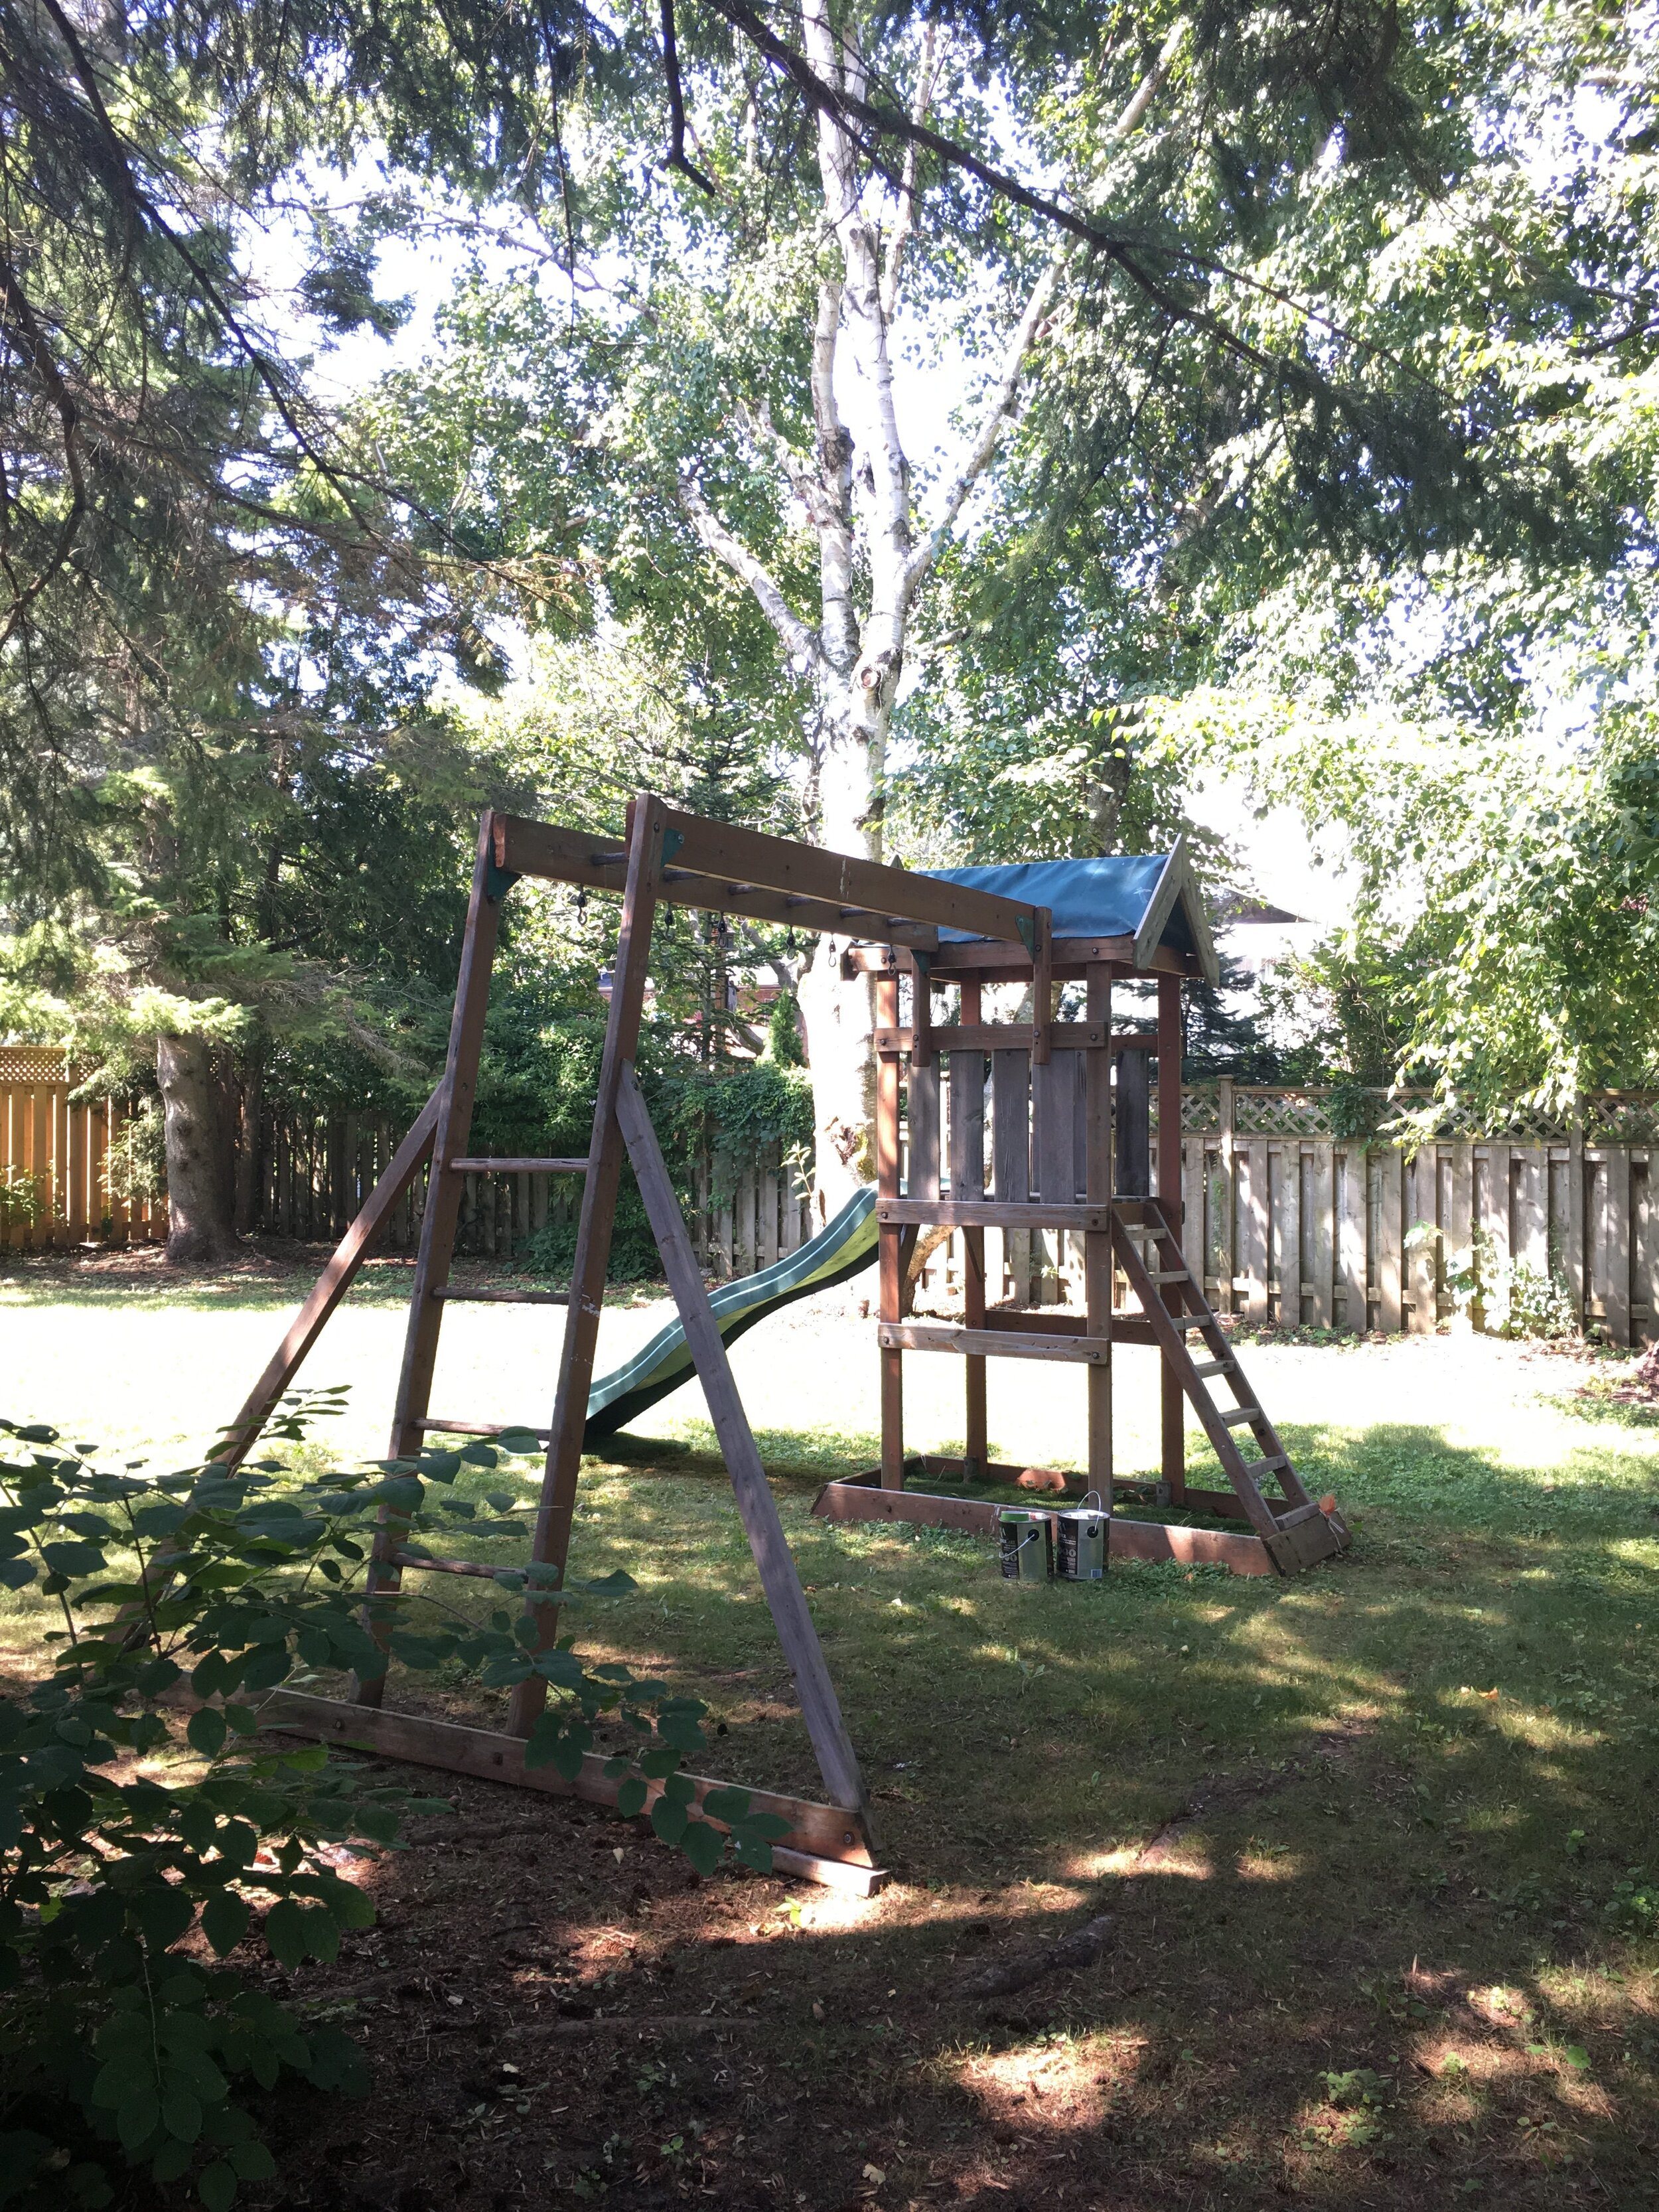 Olds kids' play set in the shade of a backyard